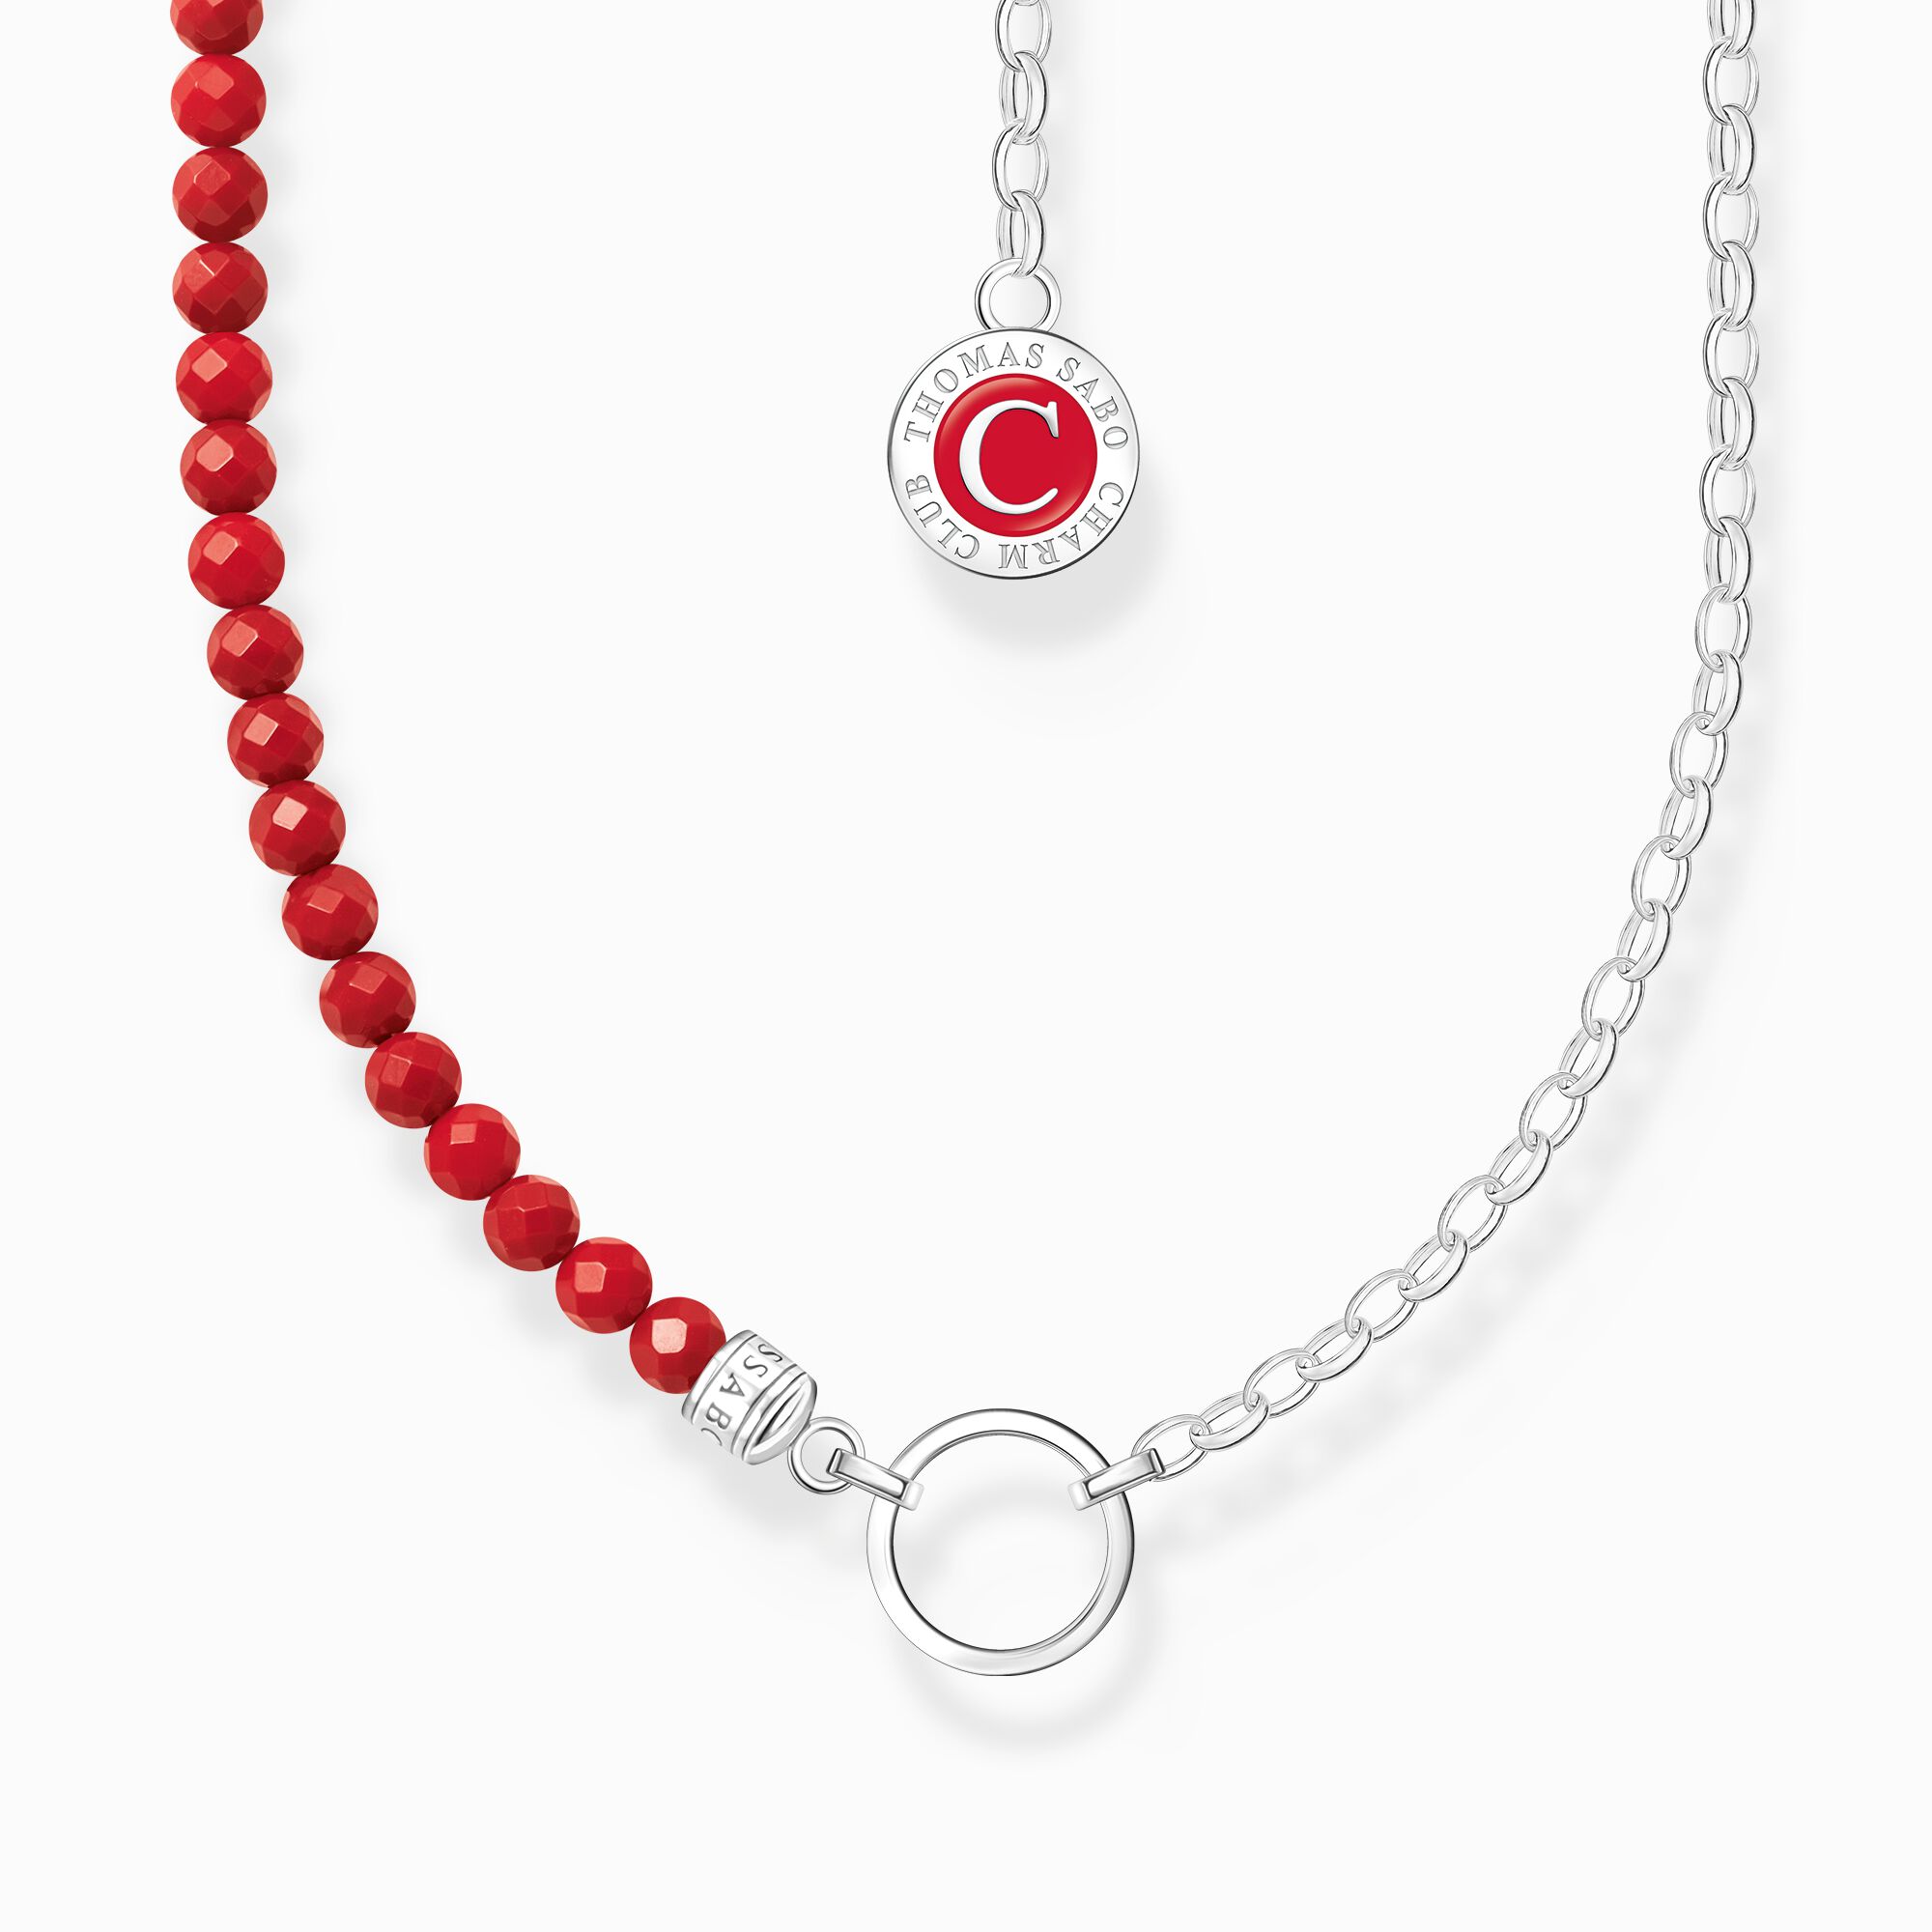 Silver member charm necklace with red beads